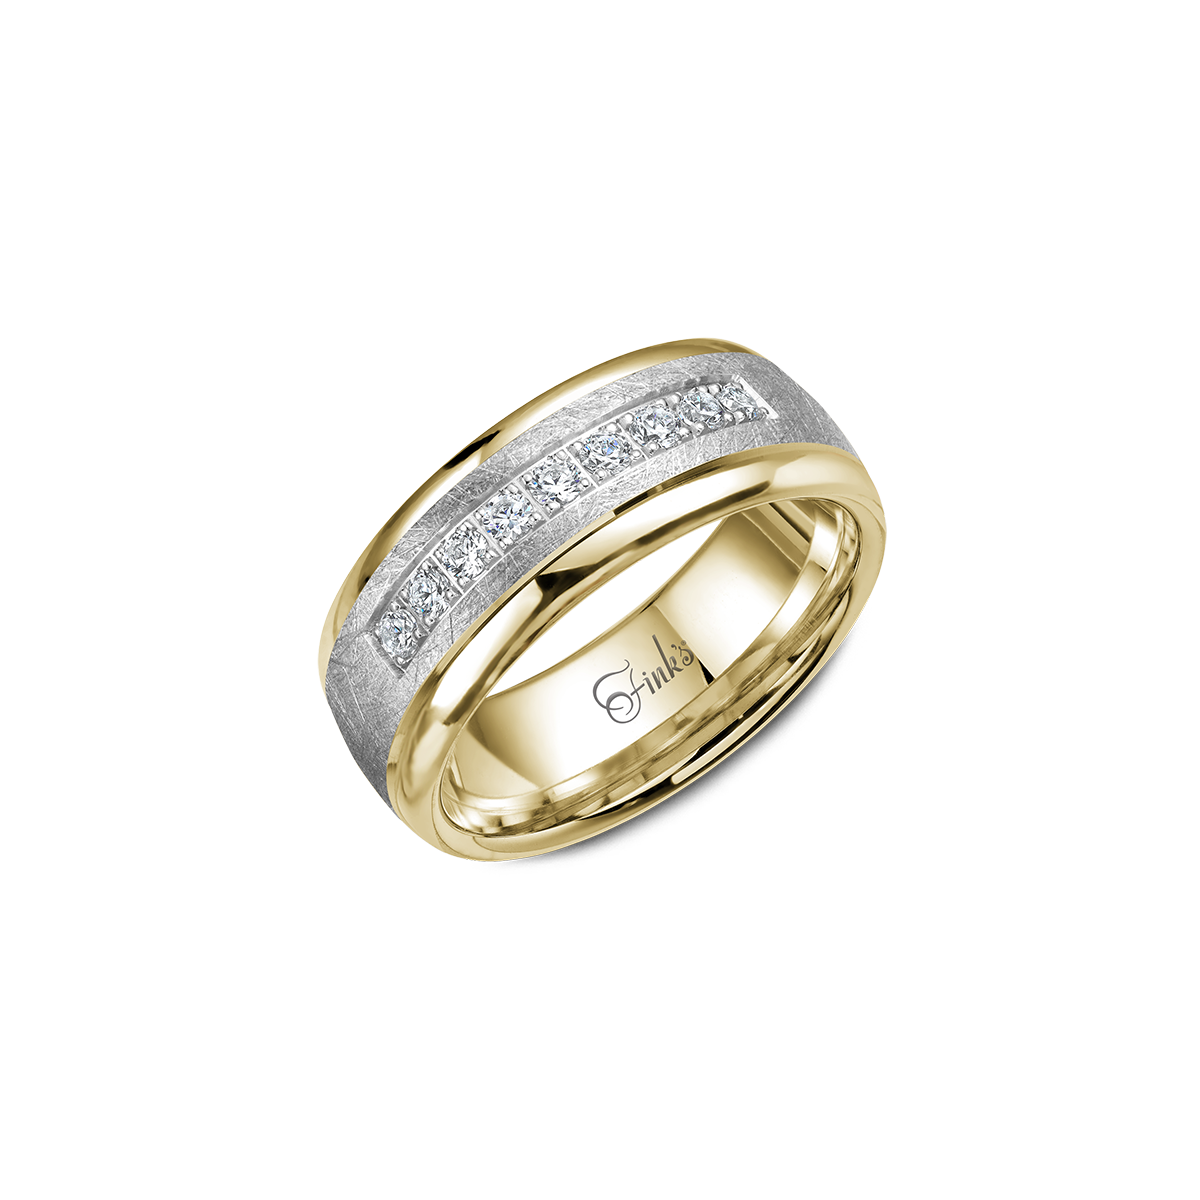 Fink's Two Tone Brushed and Polished Wedding Band with Diamonds